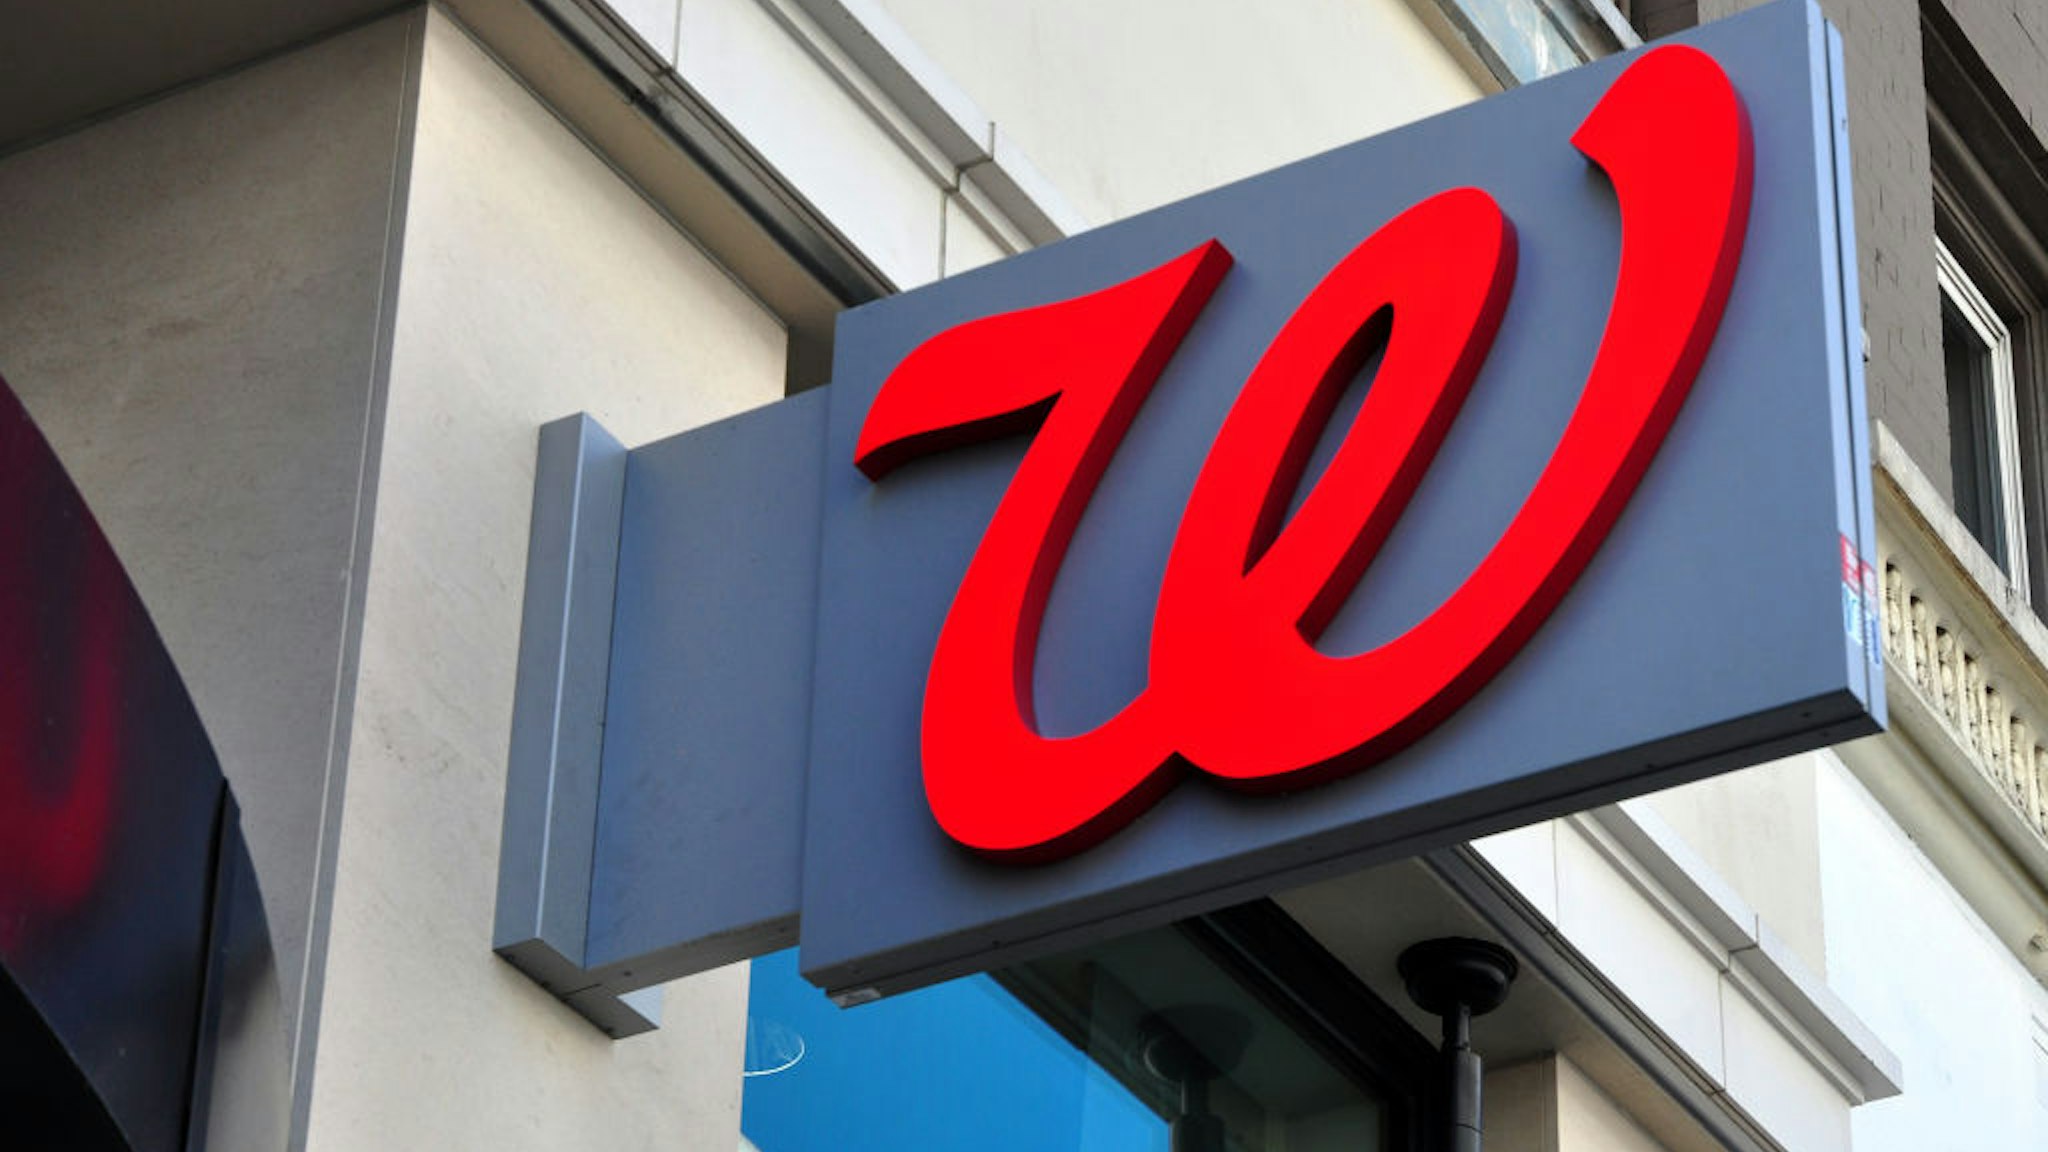 SAN FRANCISCO, CA - OCTOBER 4, 2013: A sign marks the entrance to a Walgreens store in San Francisco's upscale Union Square shopping district. (Photo by Robert Alexander/Getty Images)